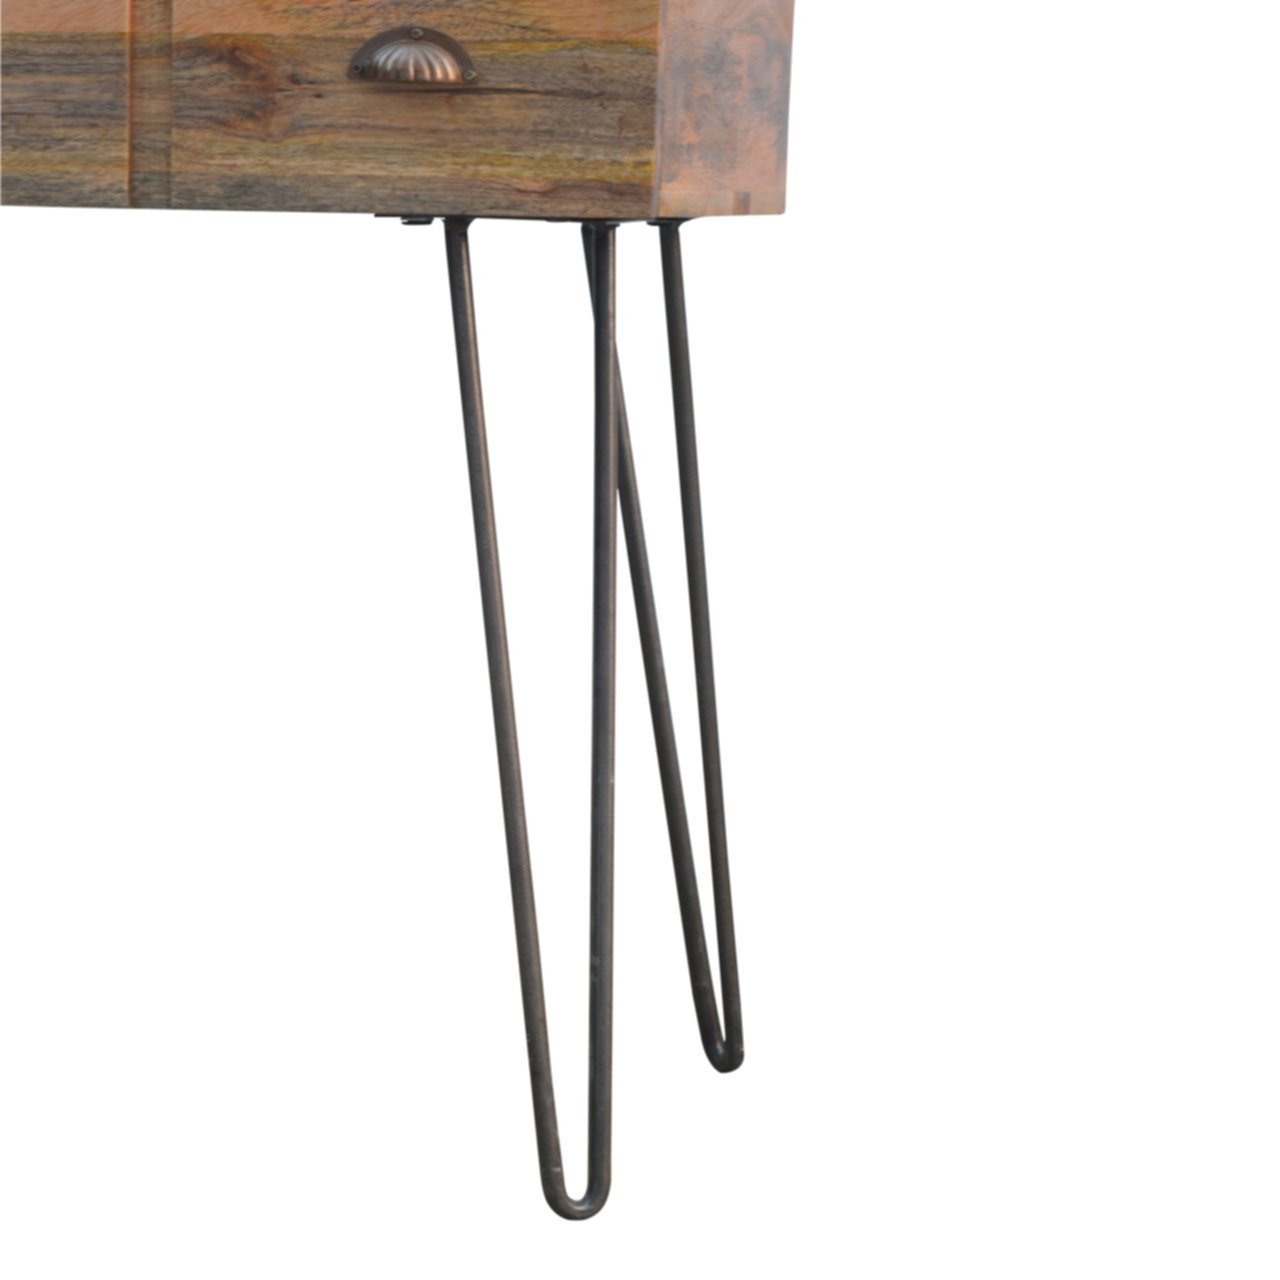 Solid Wood 2 Drawers Console Table with Iron Base